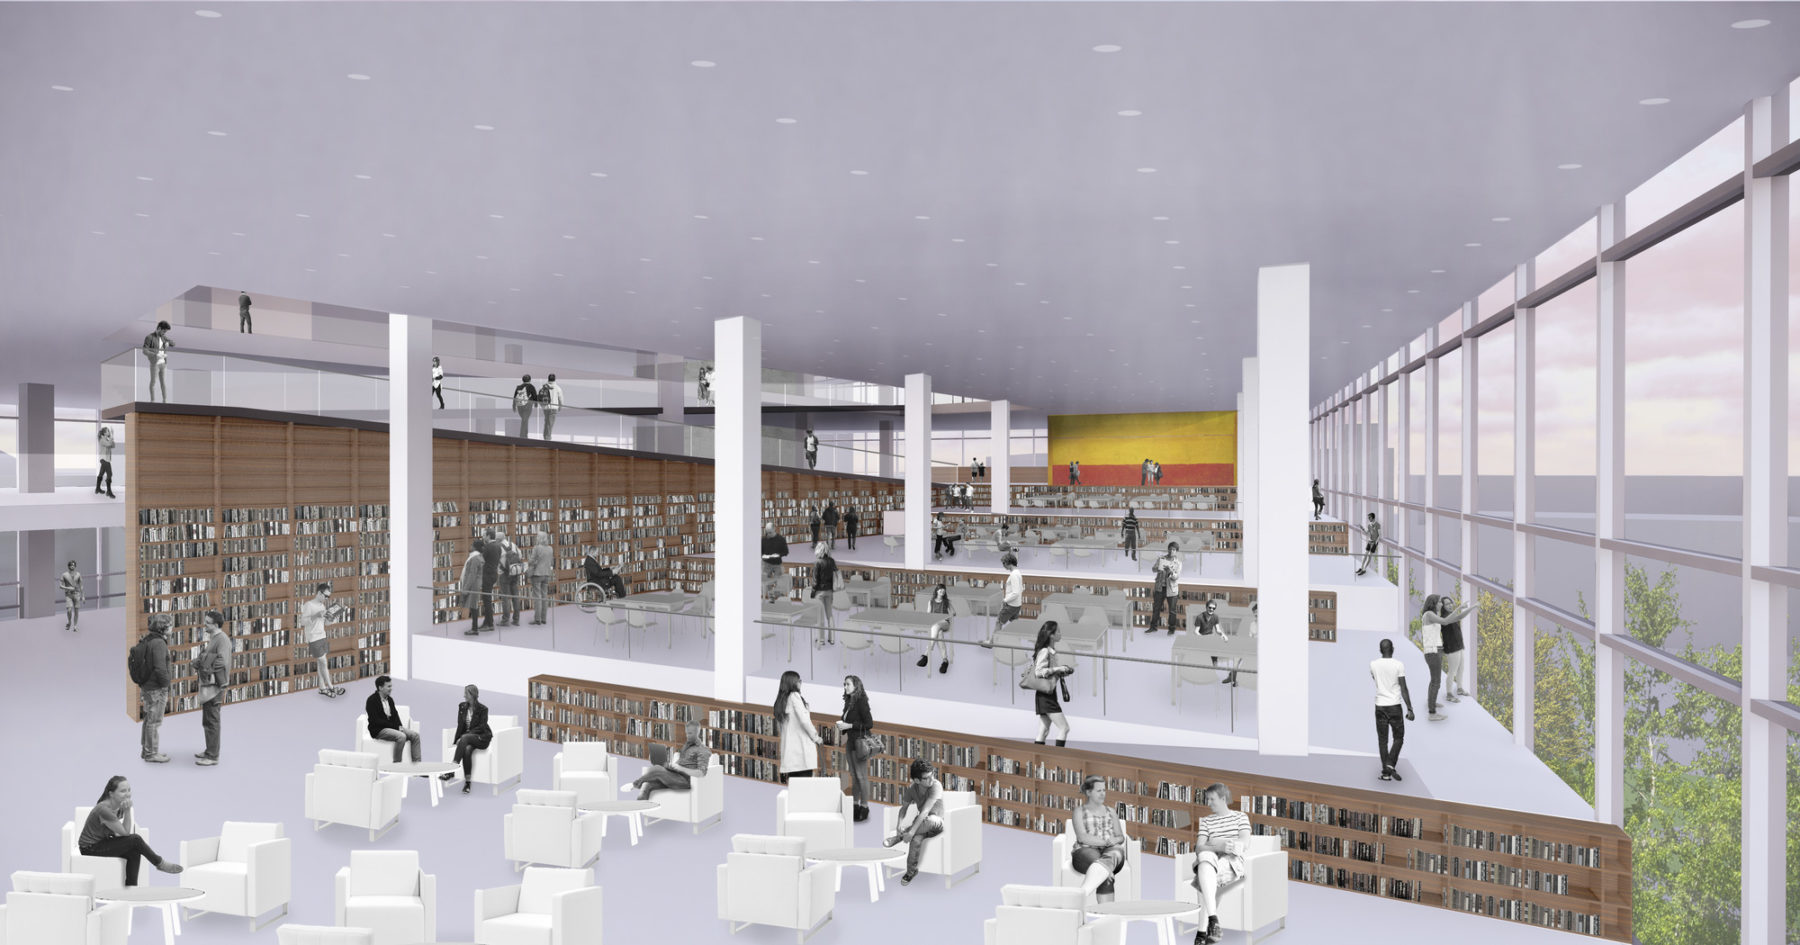 Rendering of the new library showing books and open seating